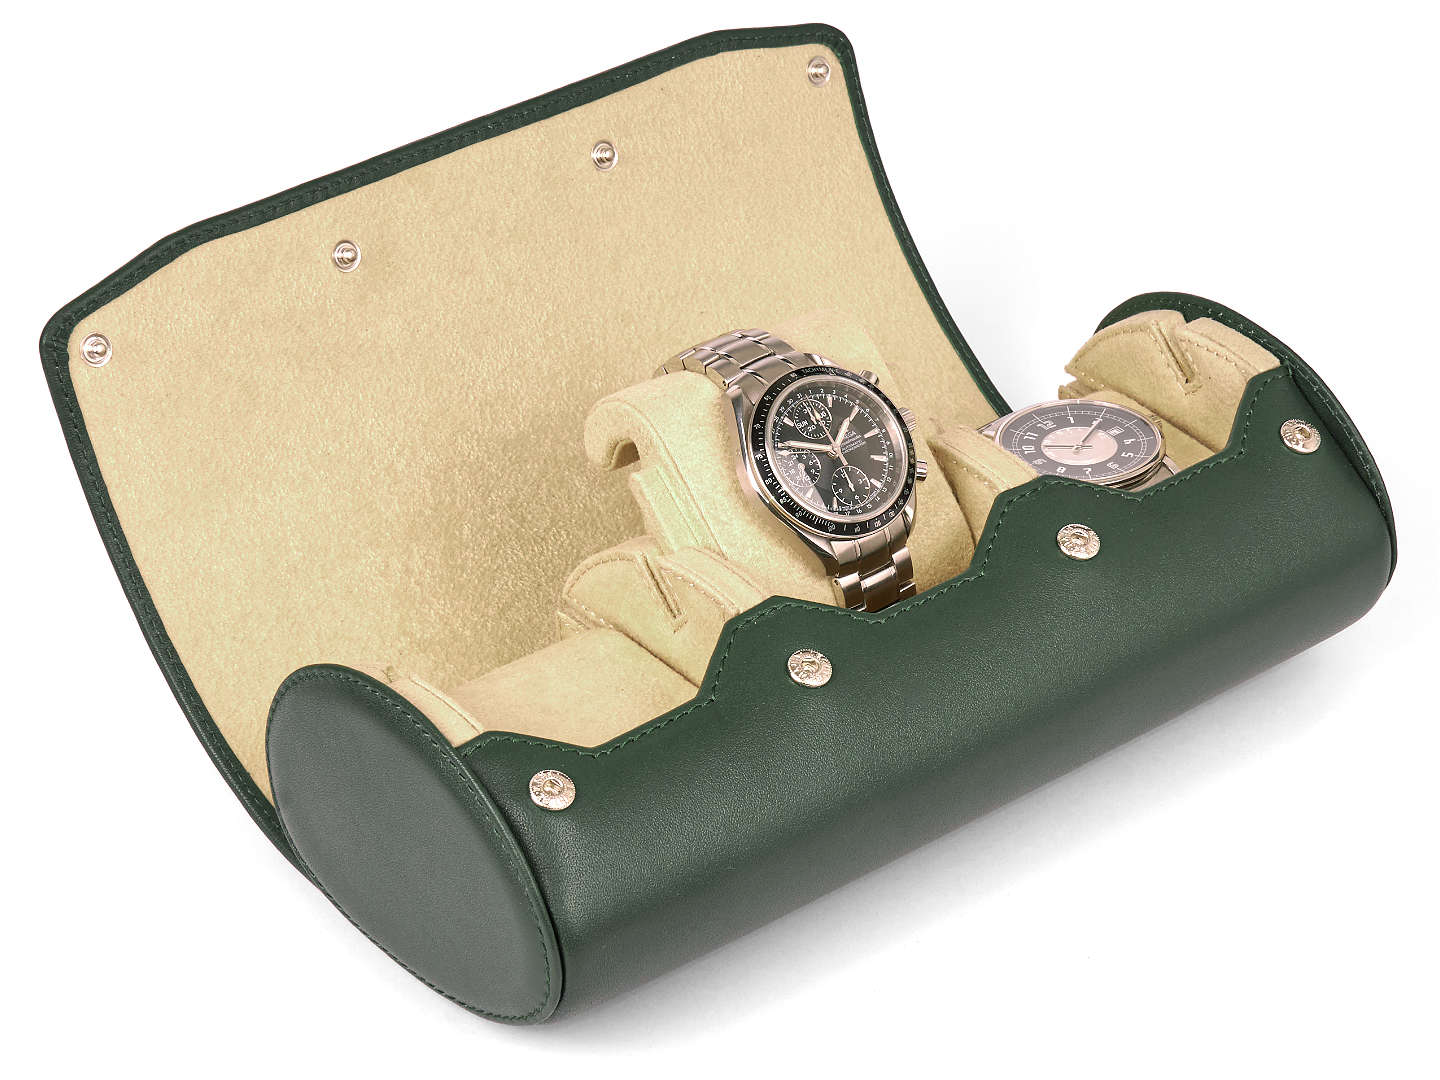    3_Watch_Travel_Watch_Green_Leather_open_2_Carapaz